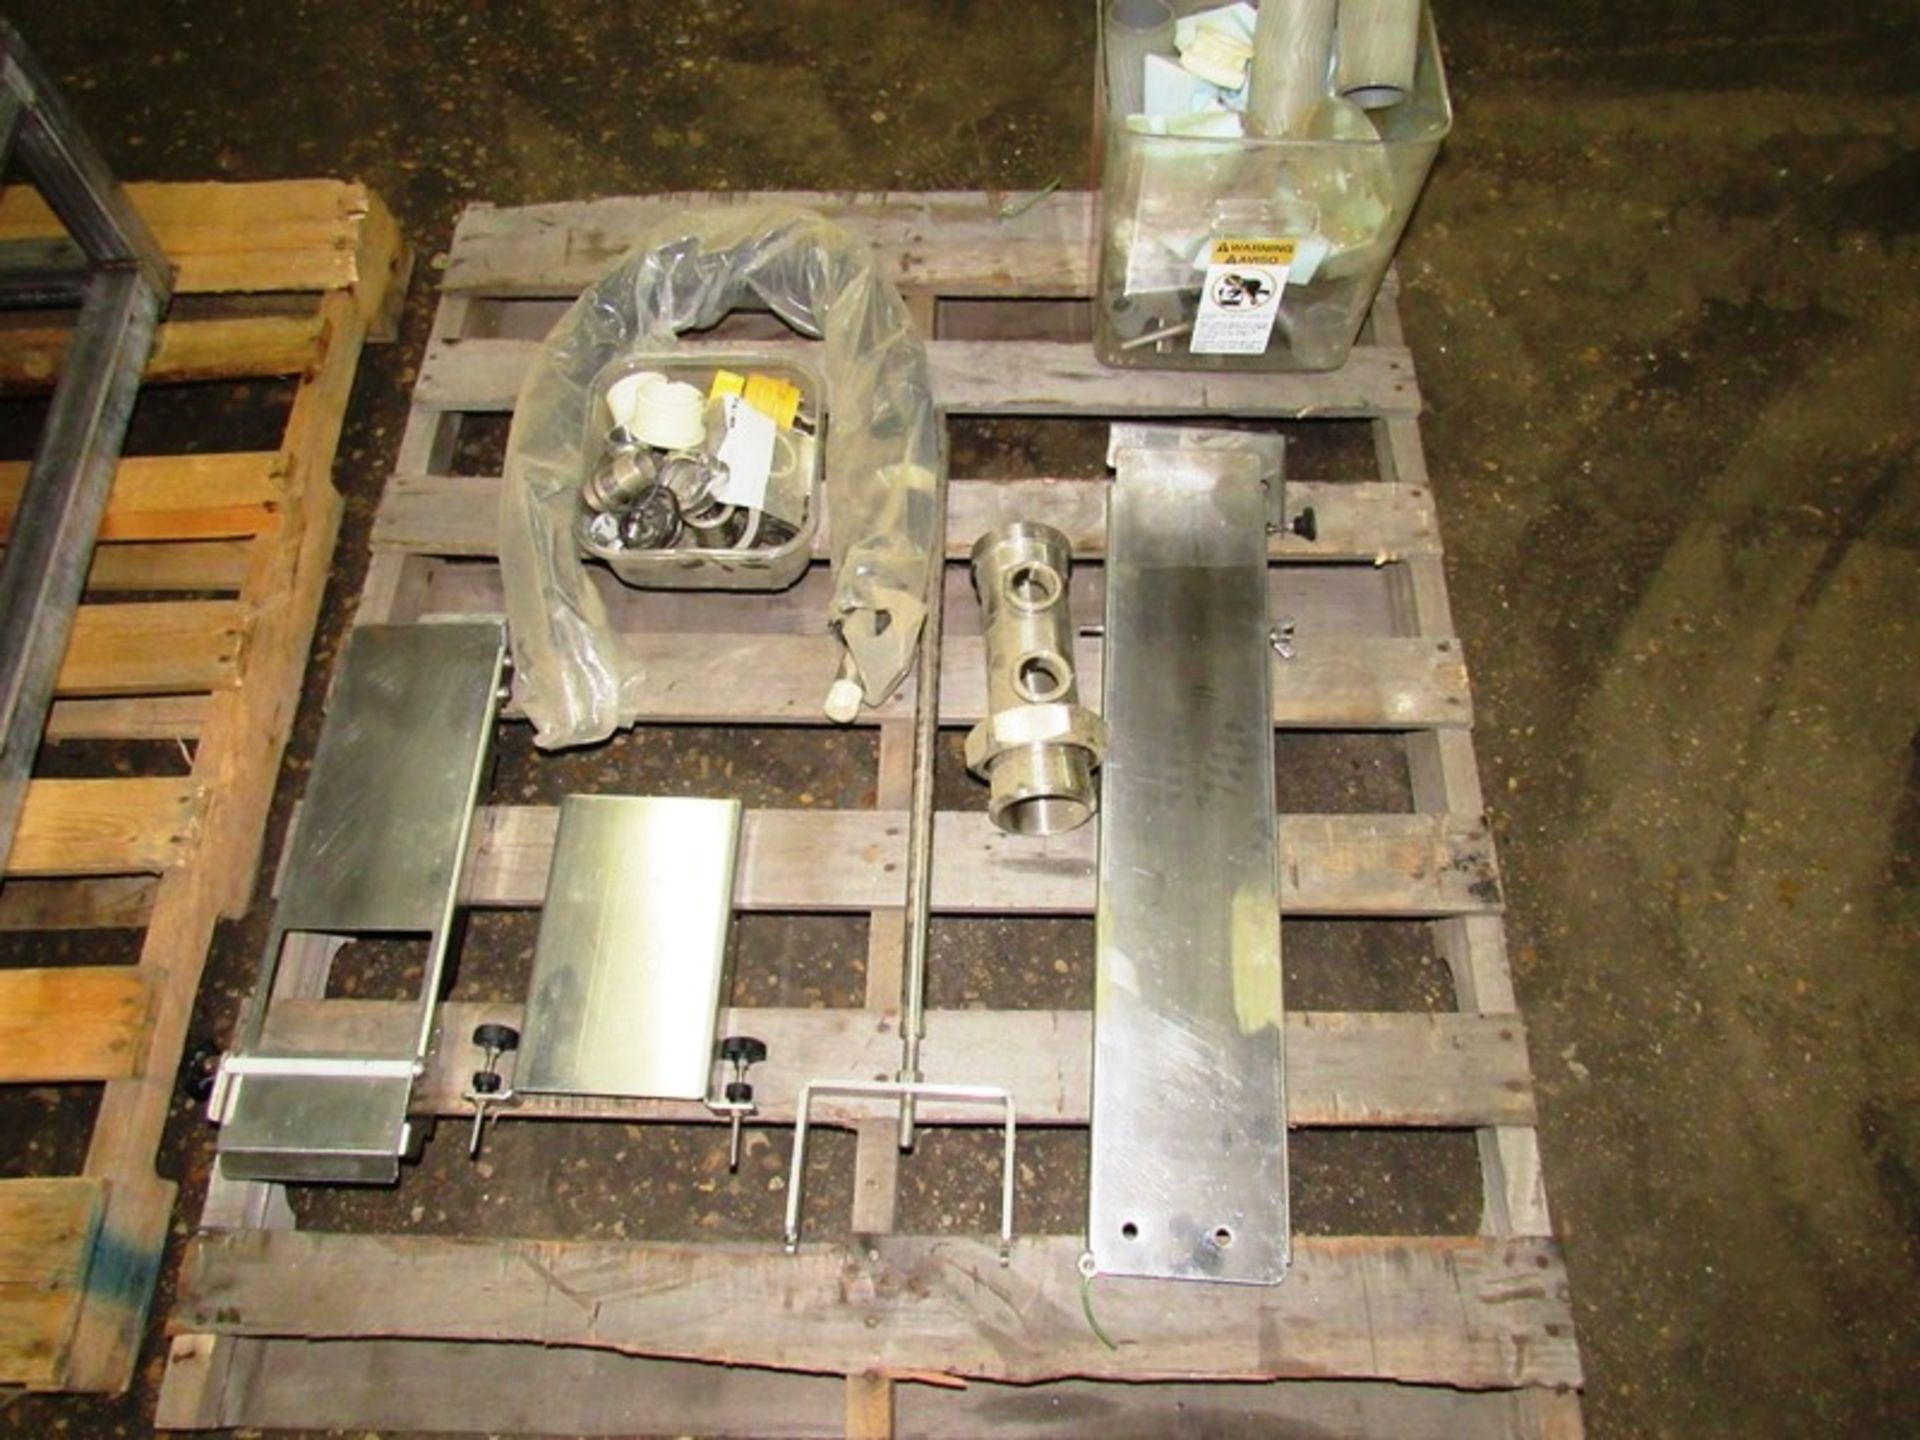 Rheon Mdl. KN300 Cornucopia Encrusting Machine, 220 volts, 3 phase - ***All Monies must be received - Image 5 of 7